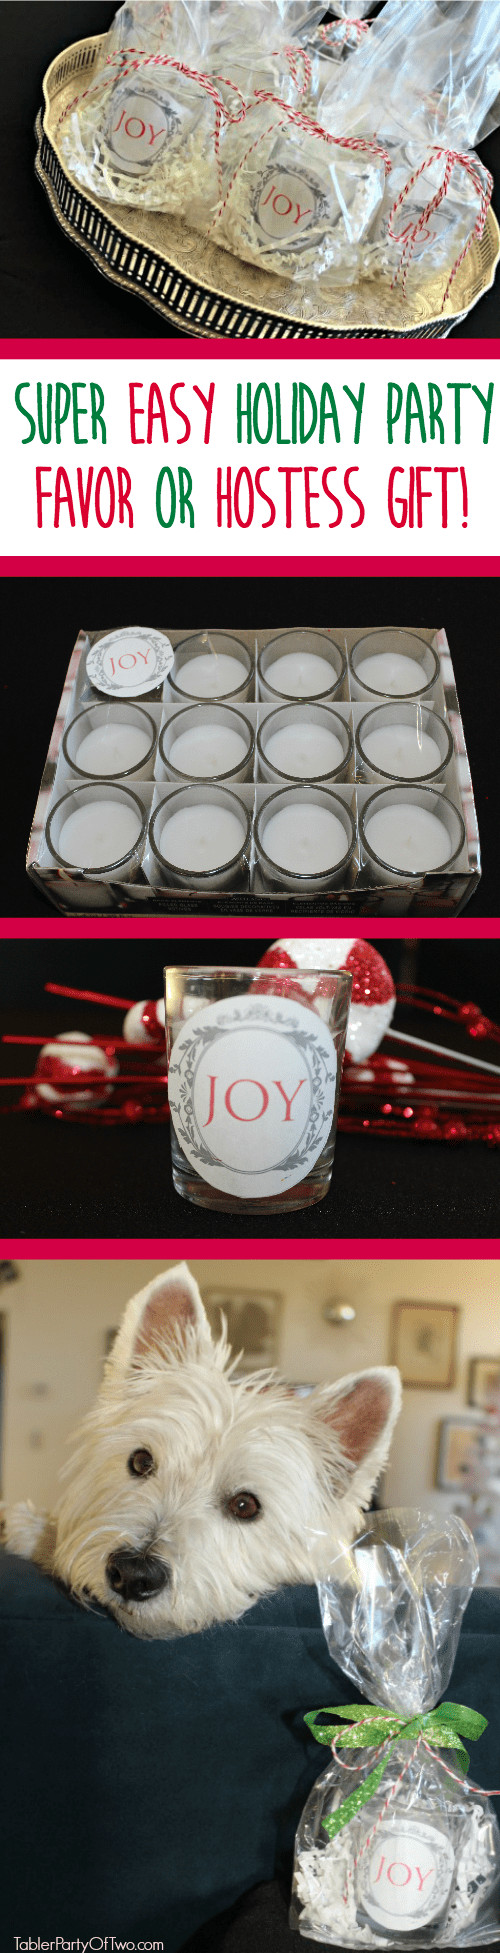 Holiday Party Hostess Gift Ideas
 Easy Christmas diy Party Favor or Hostess Gift Printable